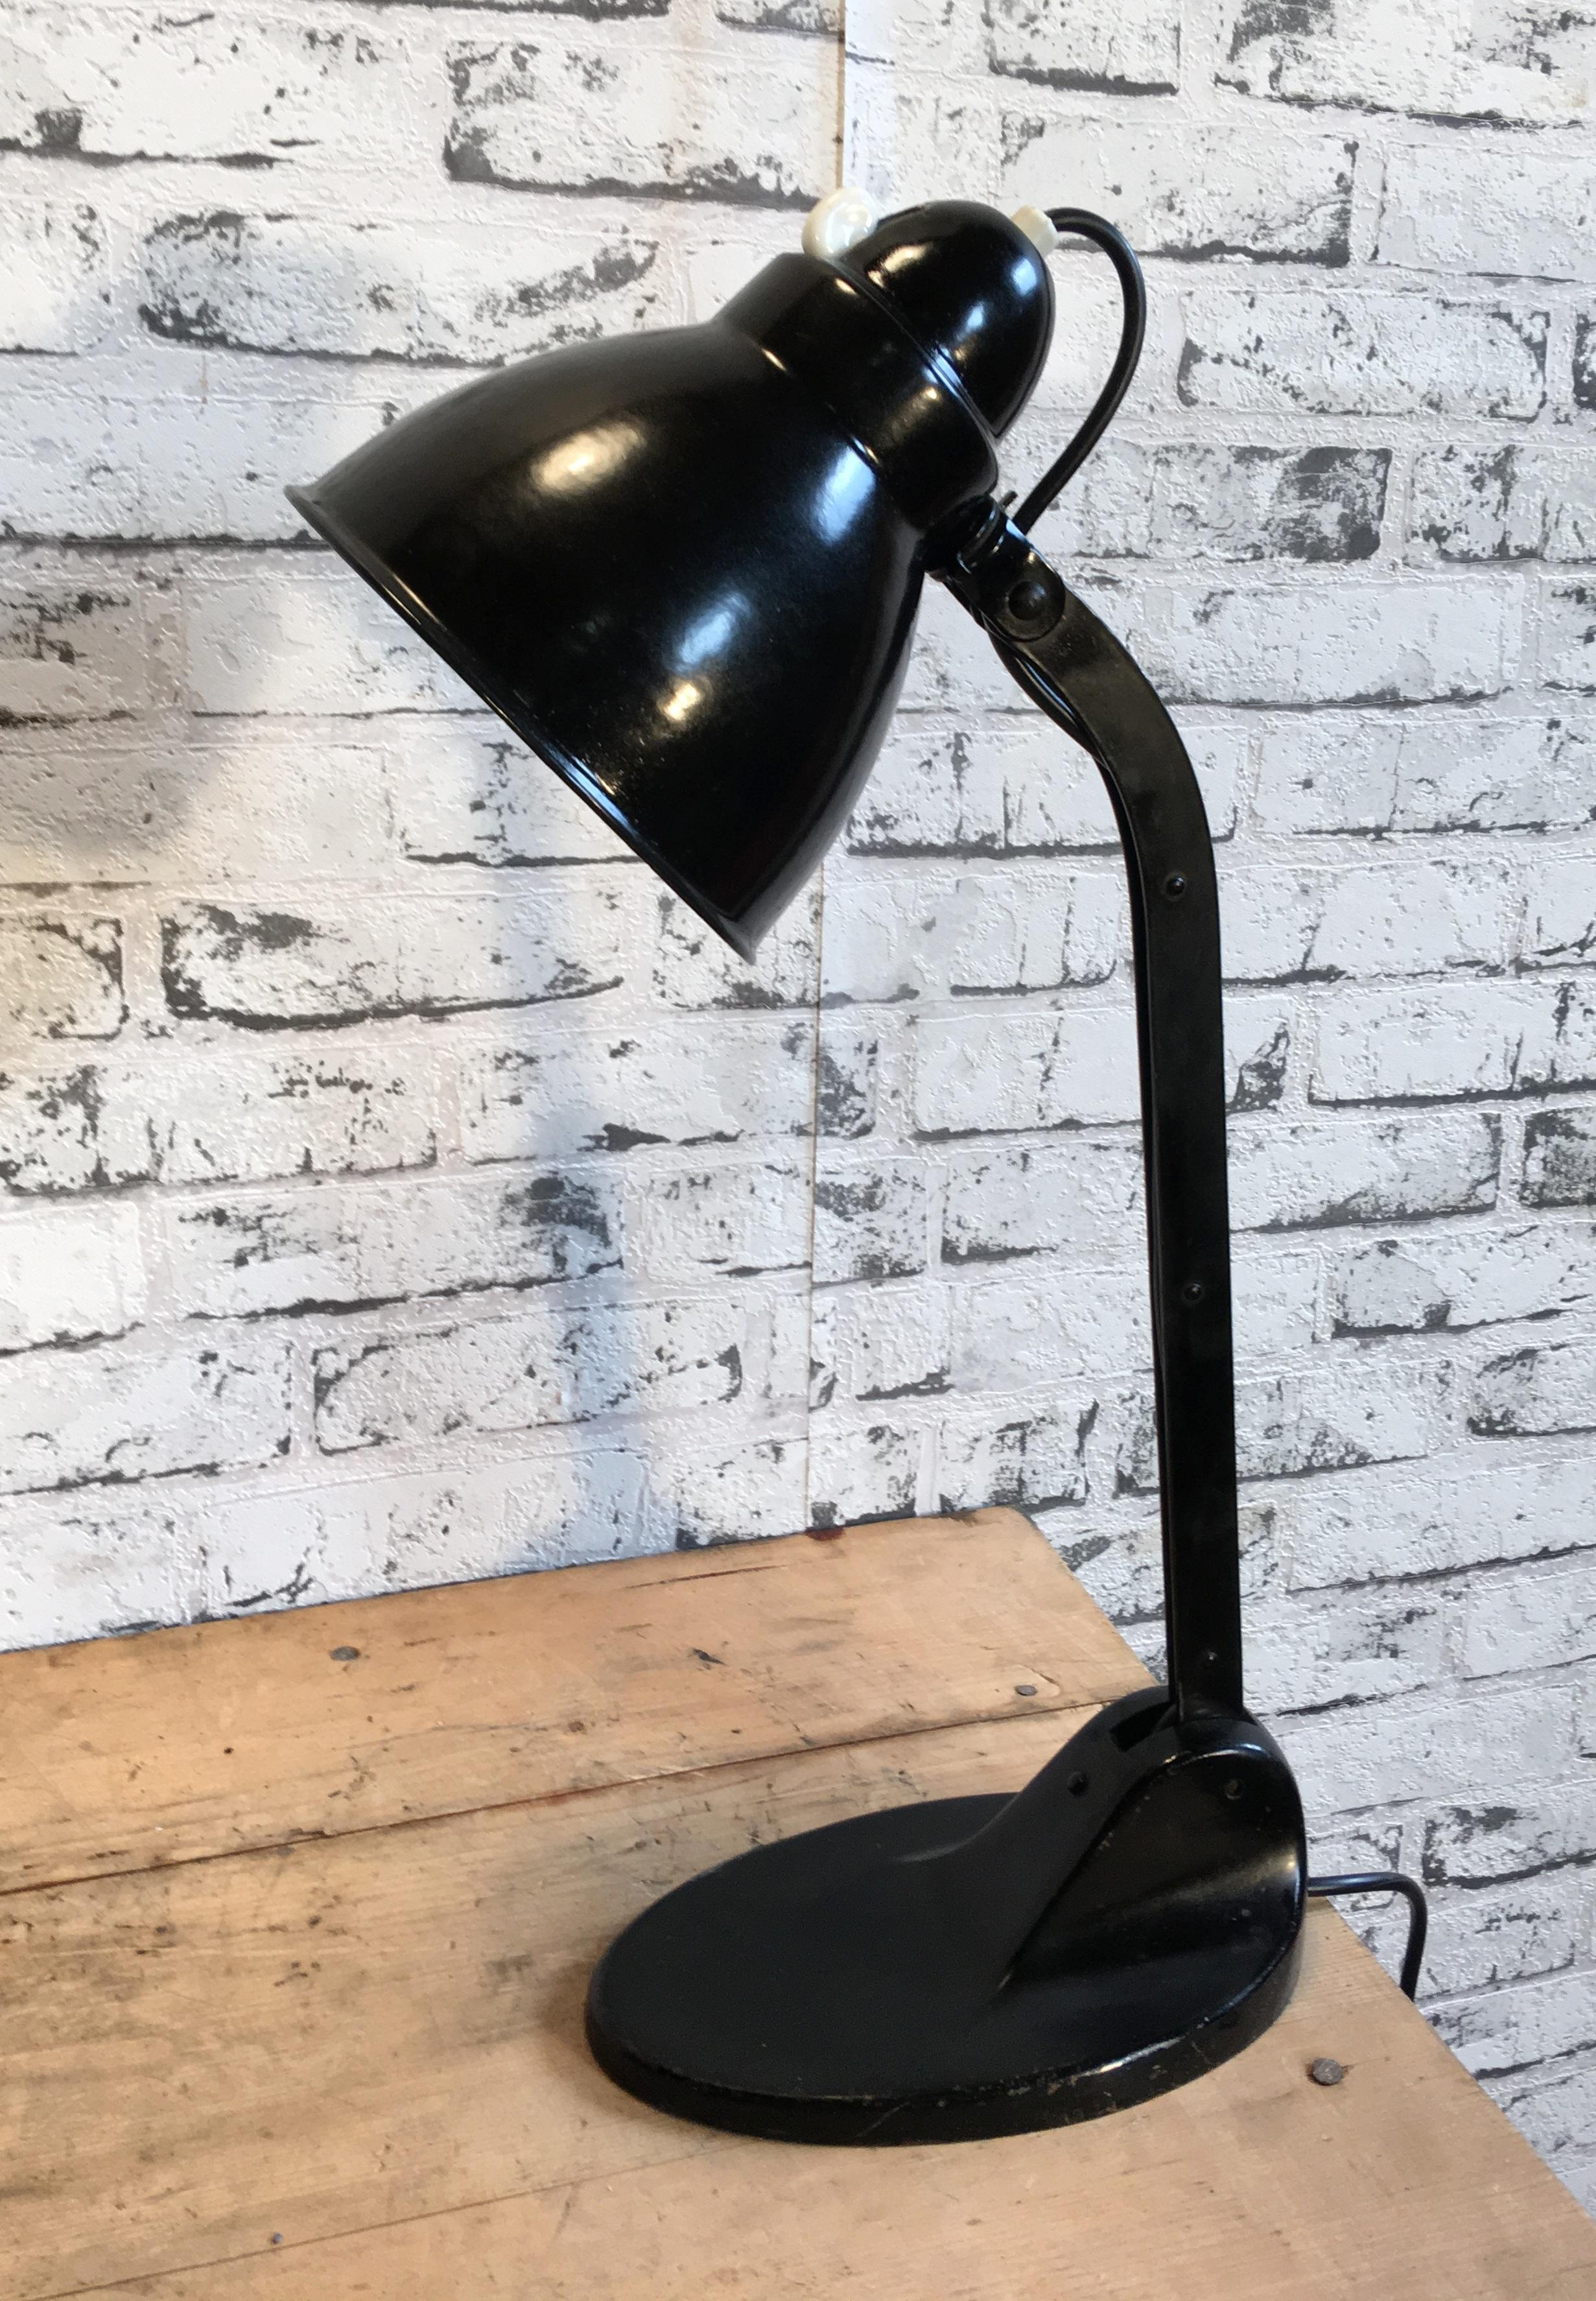 This Bauhaus industrial desk lamp was made by Victoria Lampe during the 1930s.Lamp has black enamel shade ,white interior , iron base with two adjustable joints and original socket for E 27 bulbs with rotary switch. Shade diameter: 15cm.
Very good